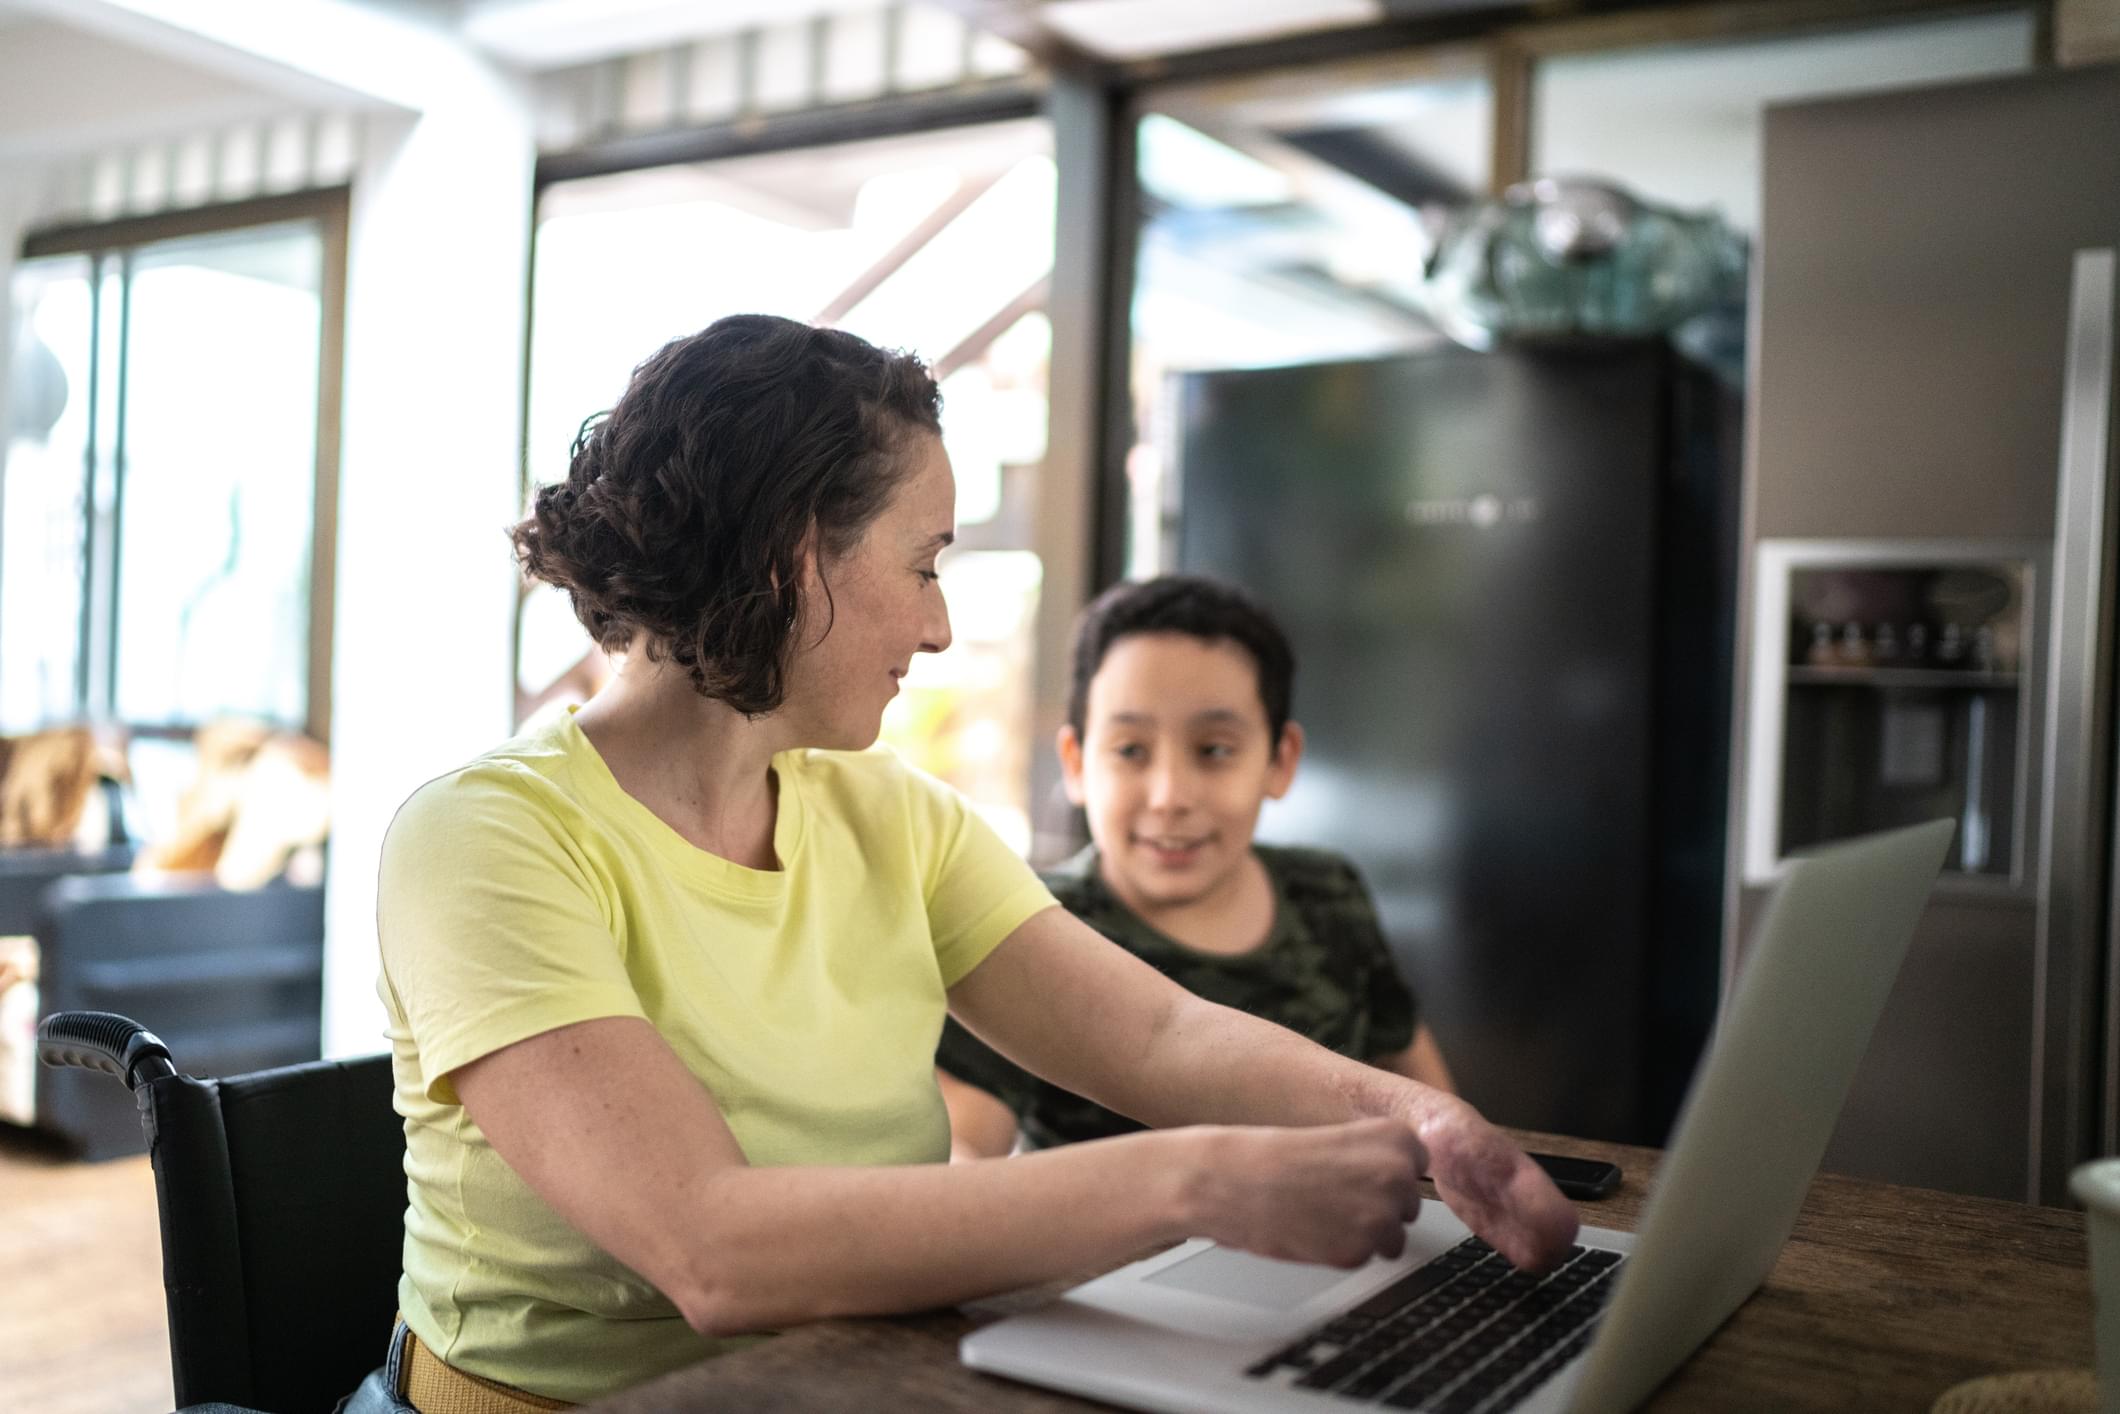 A women sits at a computer helping a young boy.